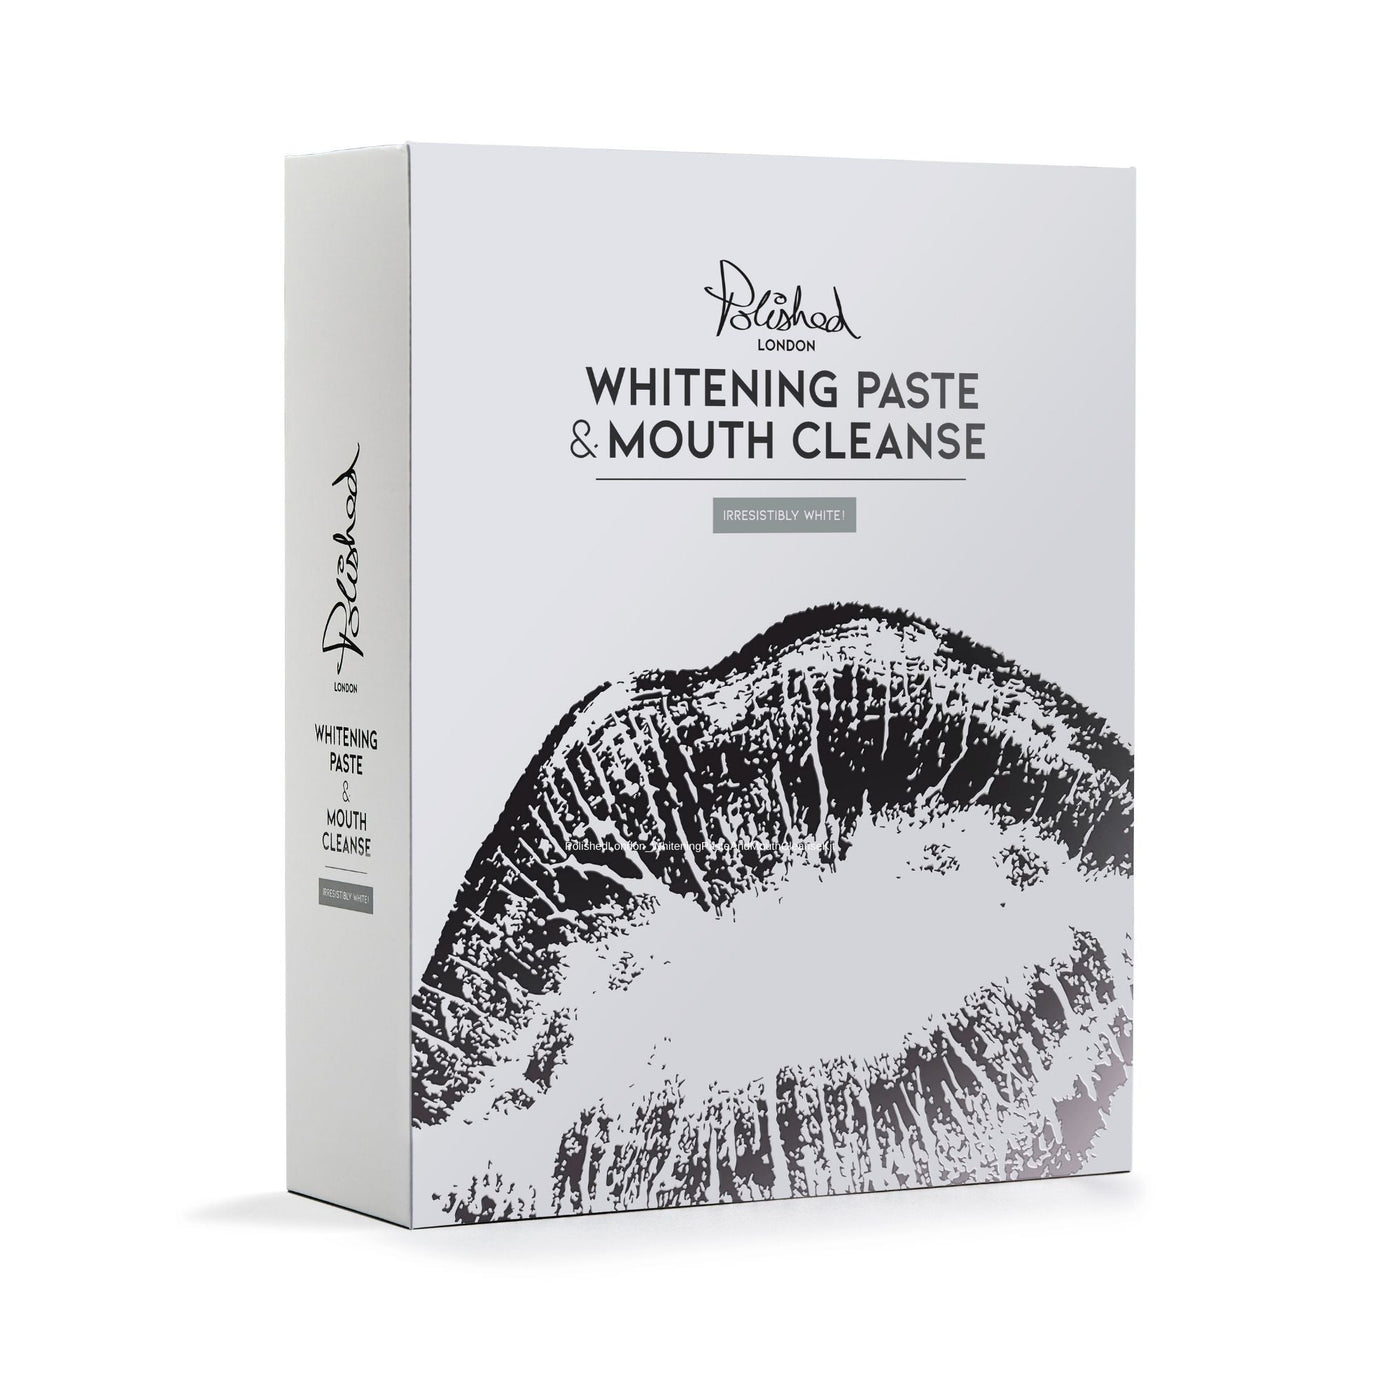 Polished London - Whitening Paste and Mouth Cleanse Set